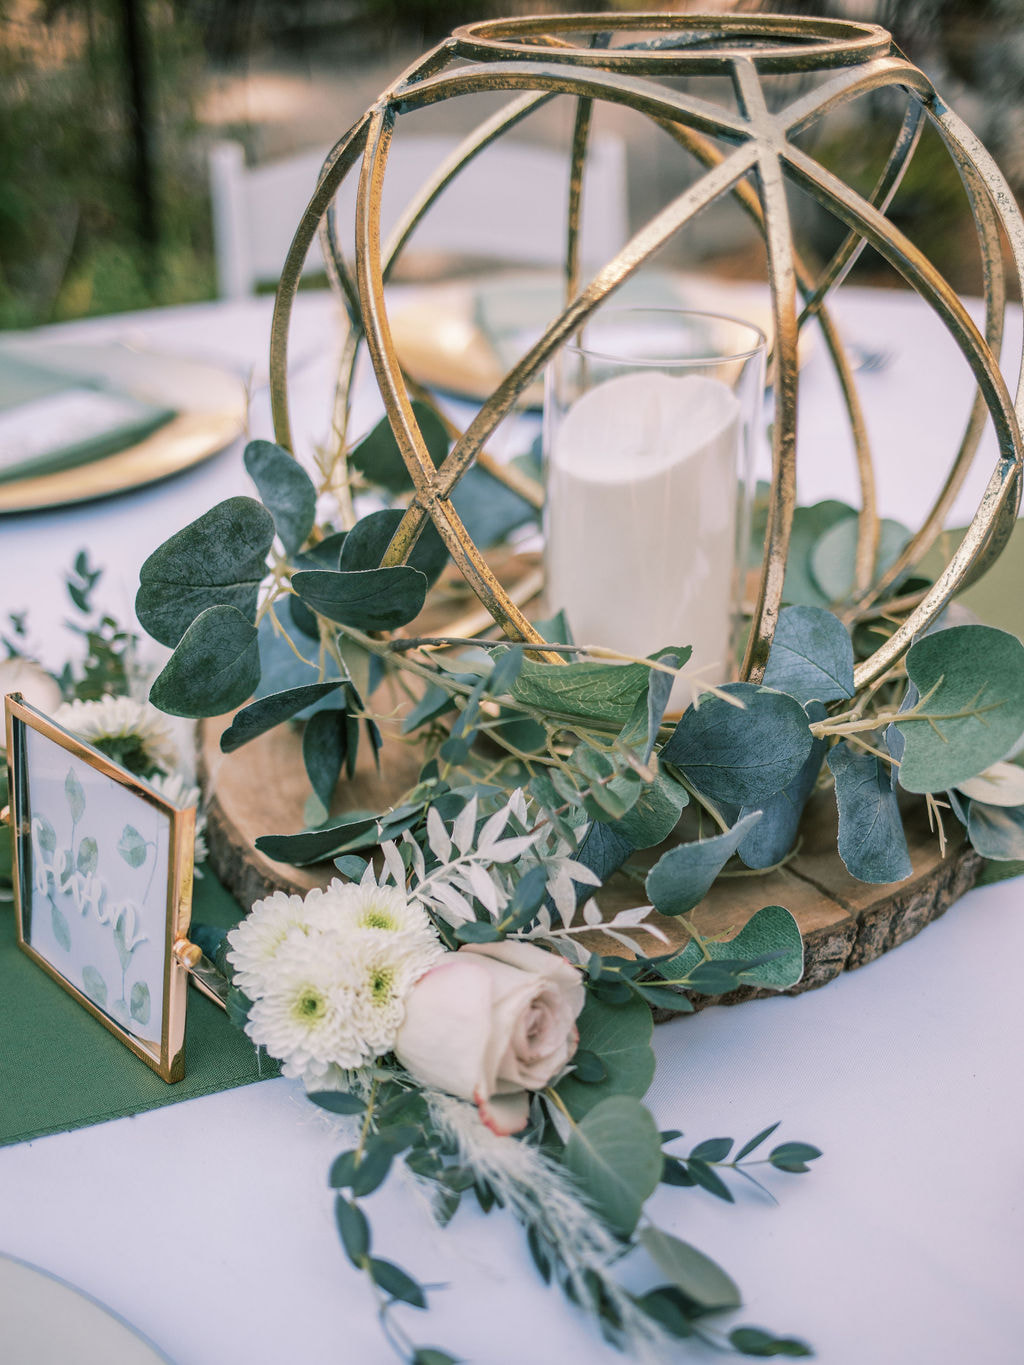 gold geometric centerpiece with greenery and floral arrangement